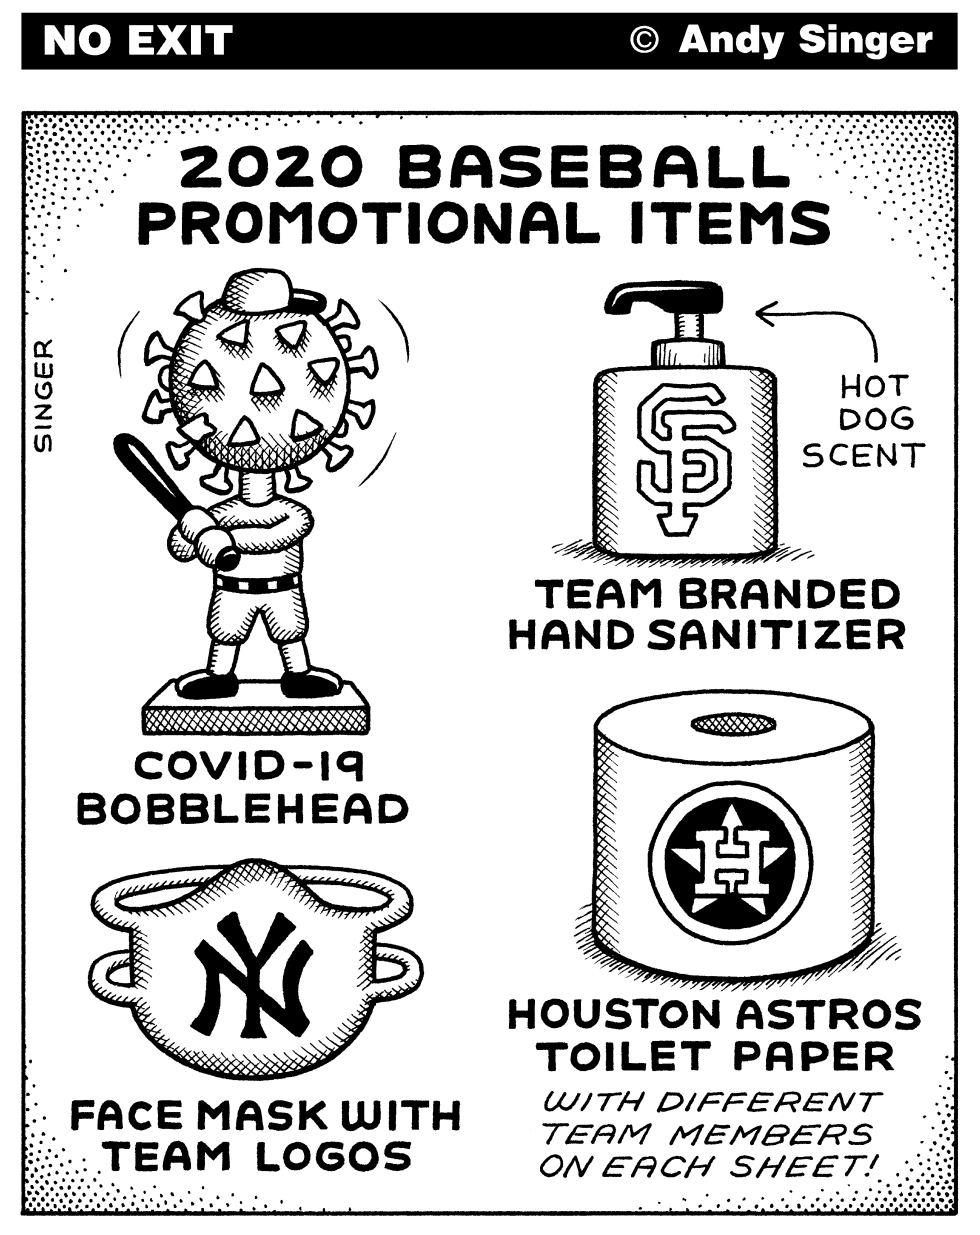  2020 BASEBALL PROMOTIONAL ITEMS by Andy Singer